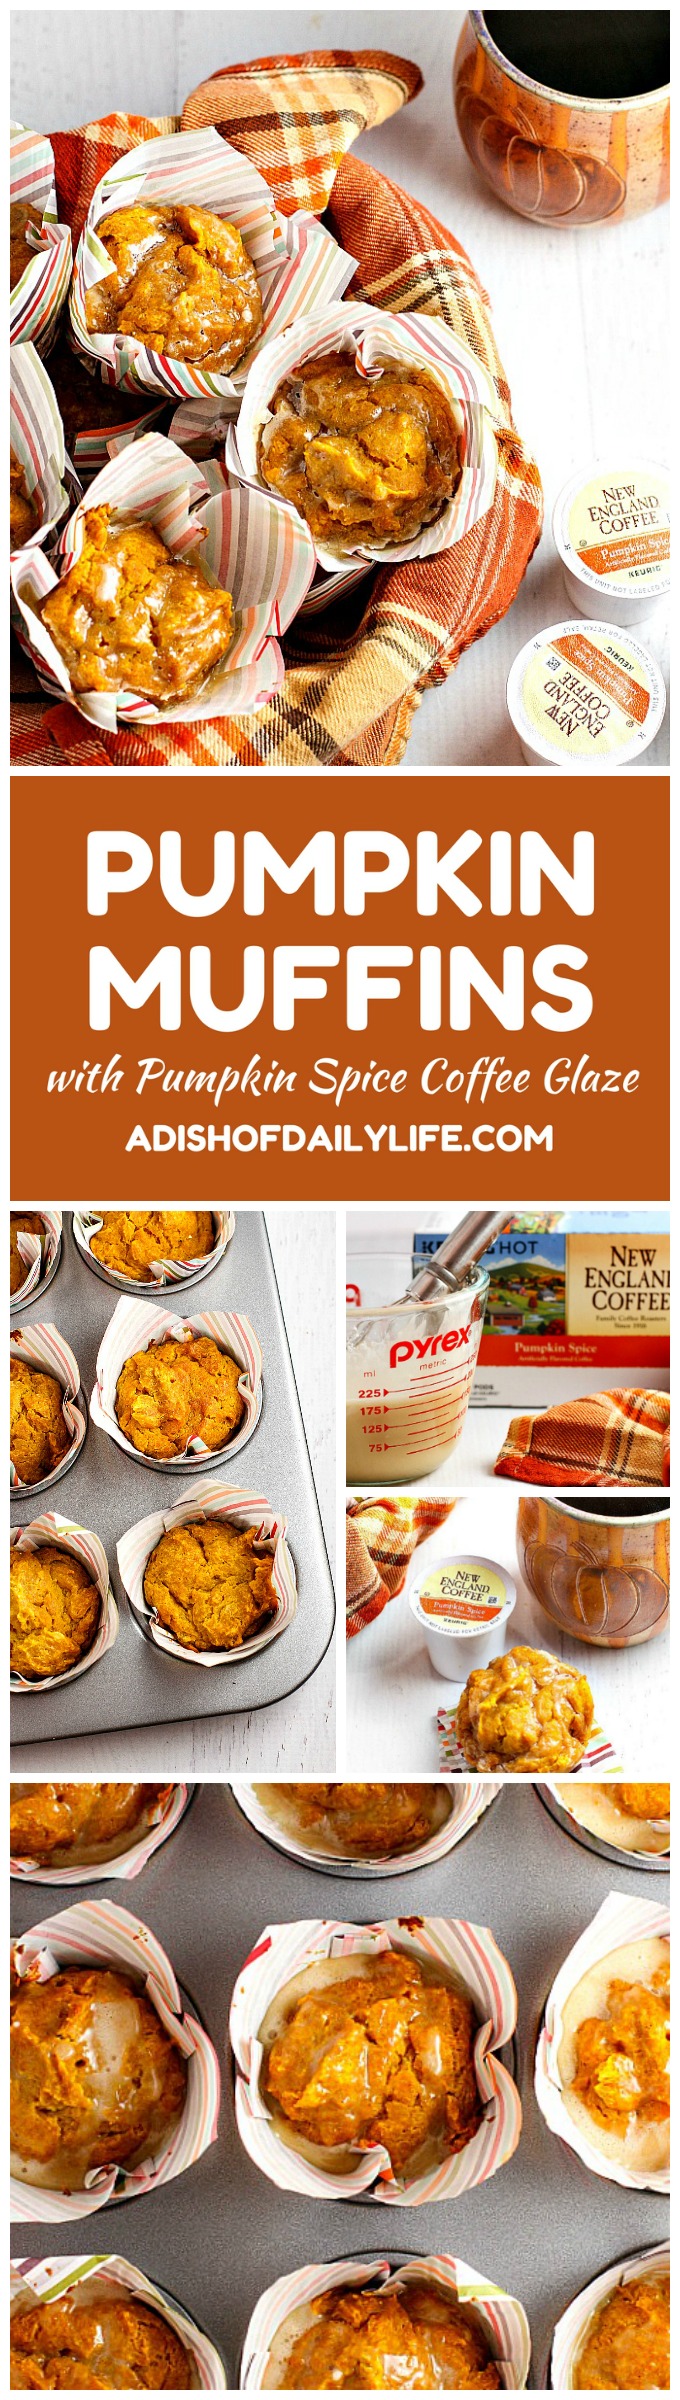 These Pumpkin Muffins with Pumpkin Spice Coffee Glaze are perfectly moist and have just the right amount of sweetness. And you will love the pumpkin spice coffee glaze...it adds a wonderful depth of flavor!